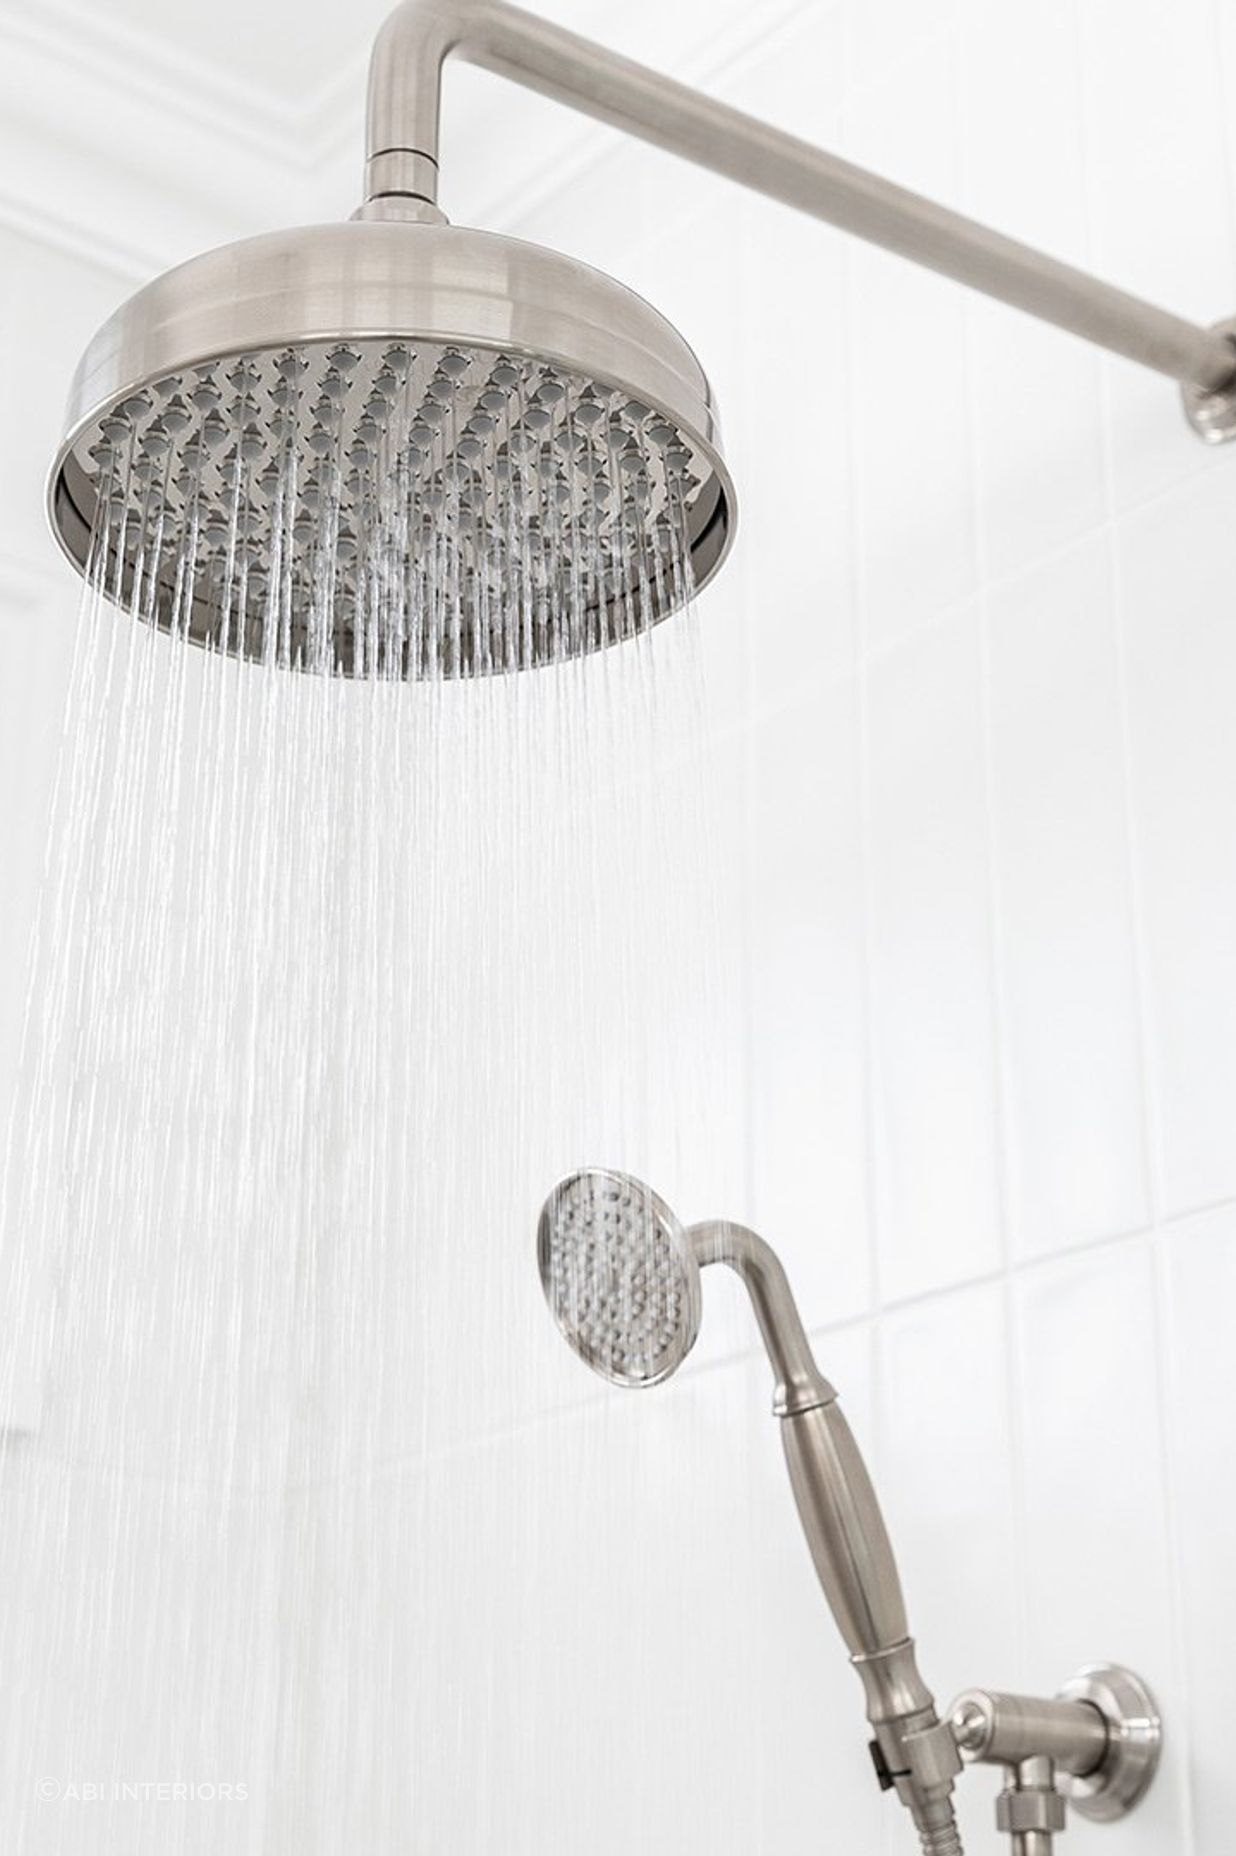 A water-efficient shower head is designed to reduce water usage, thereby promoting conservation while still providing a satisfying shower experience. Featured product: Kingsley Shower Head Round.